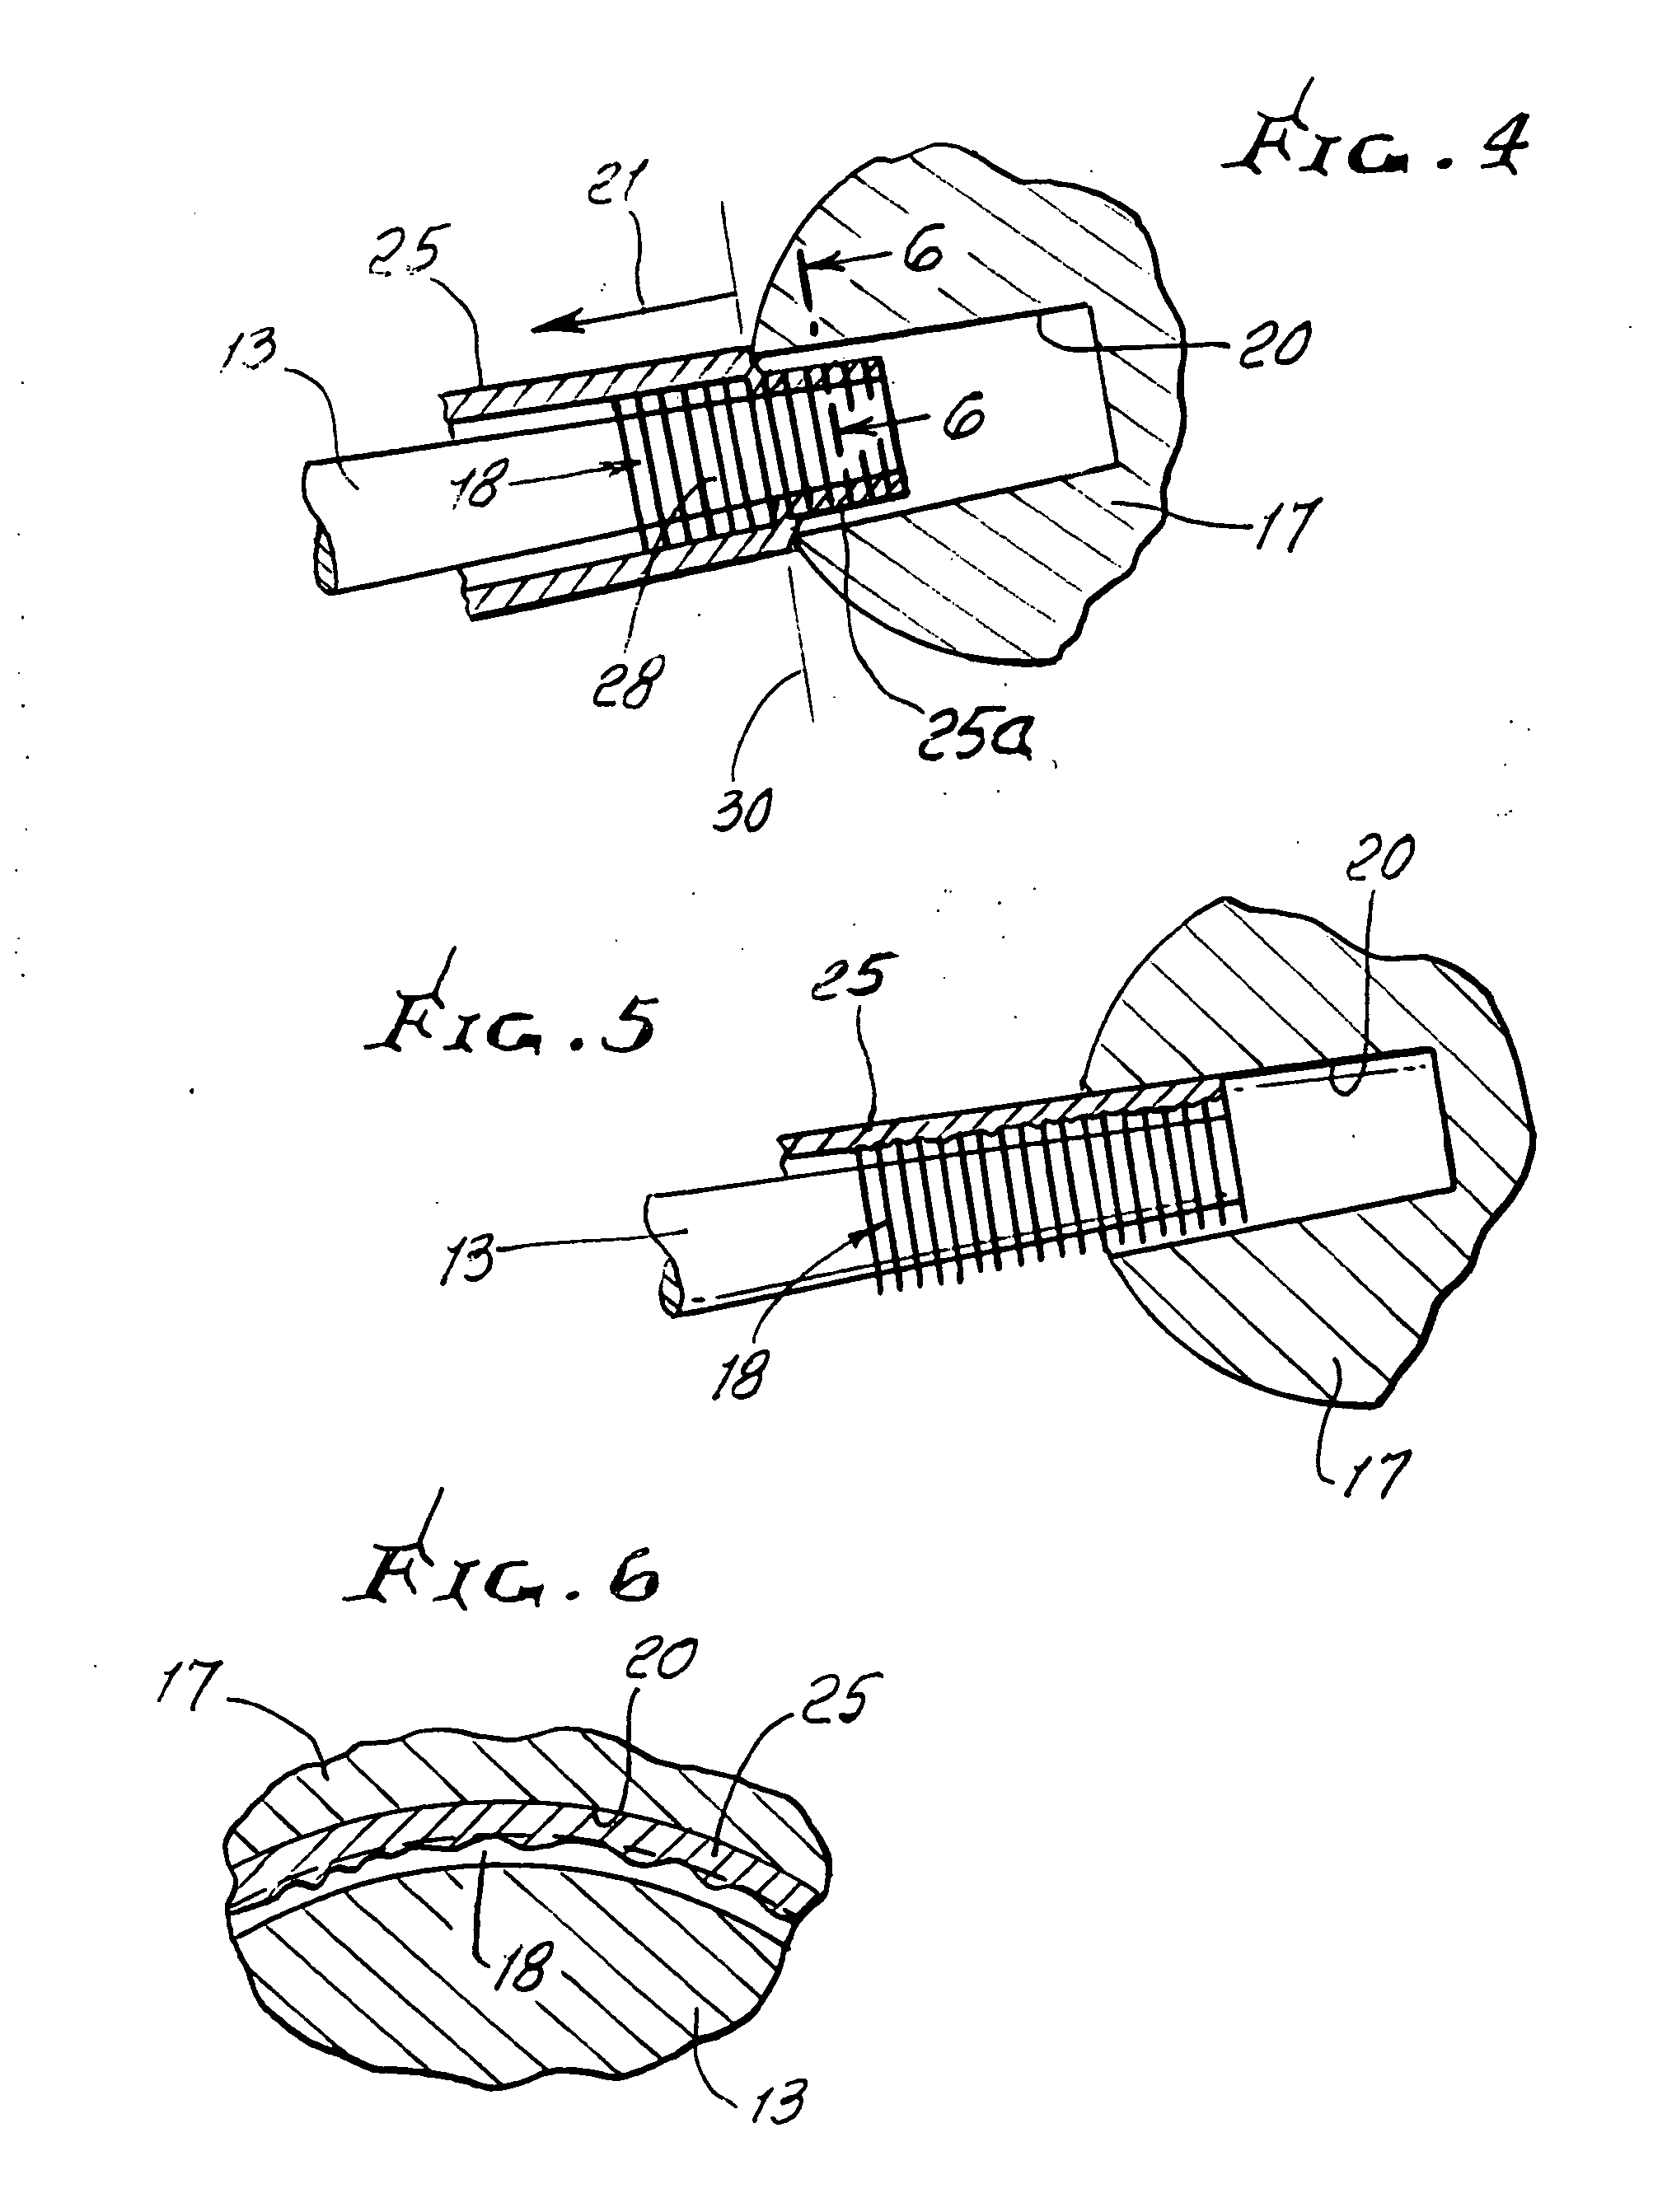 Hip surgery neck and ball adjustment apparatus and method